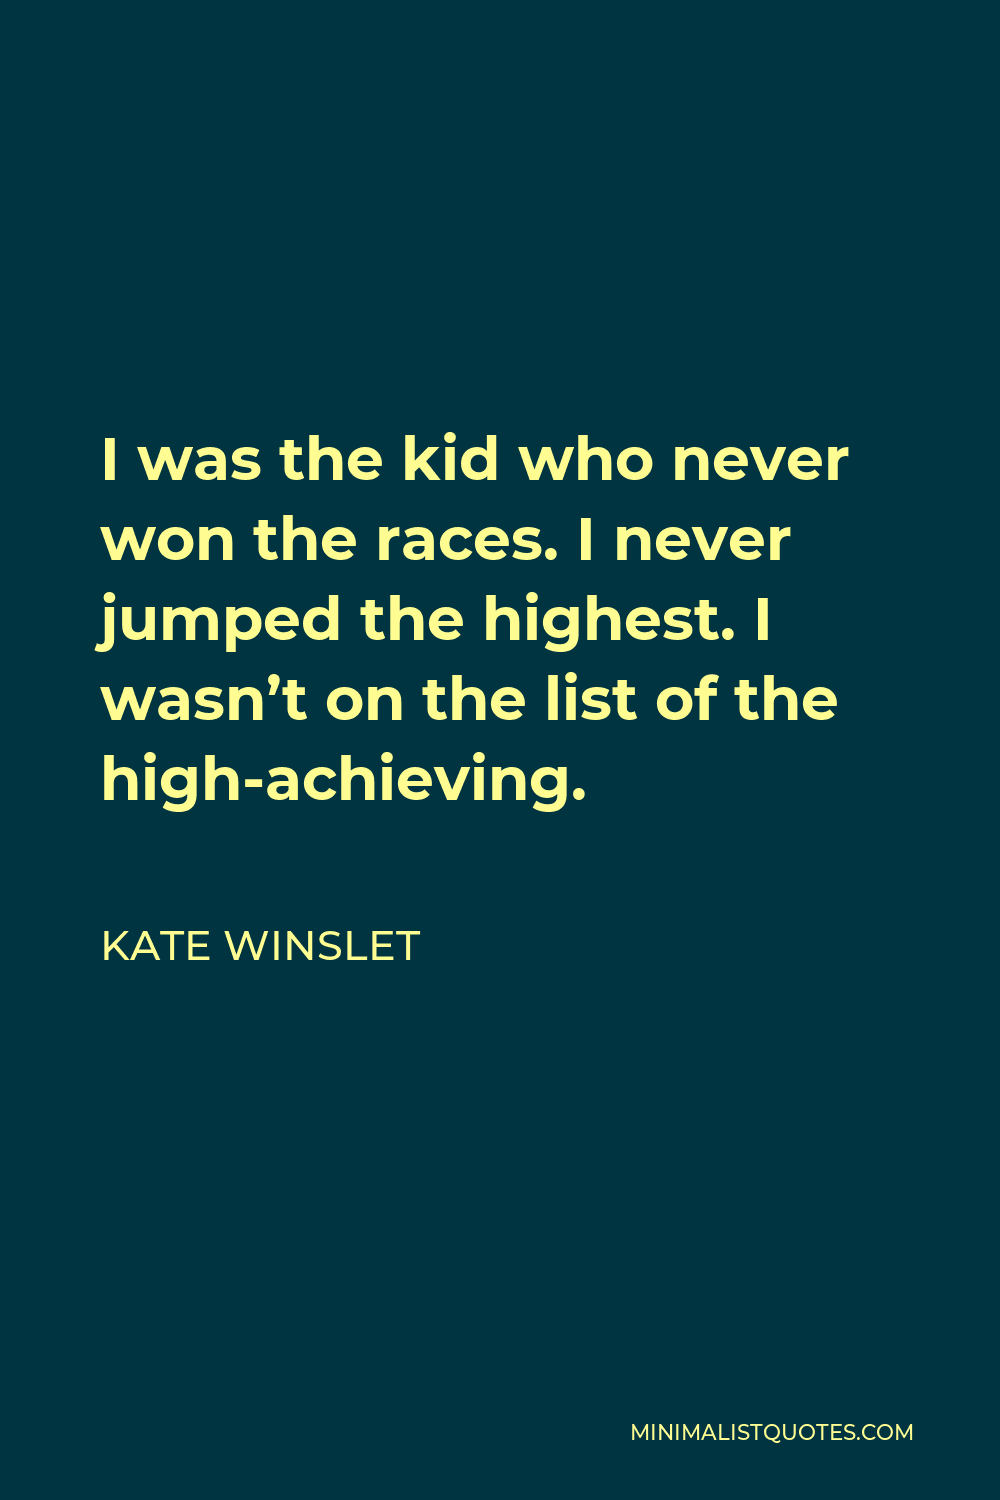 Kate Winslet Quote - I was the kid who never won the races. I never jumped the highest. I wasn’t on the list of the high-achieving.